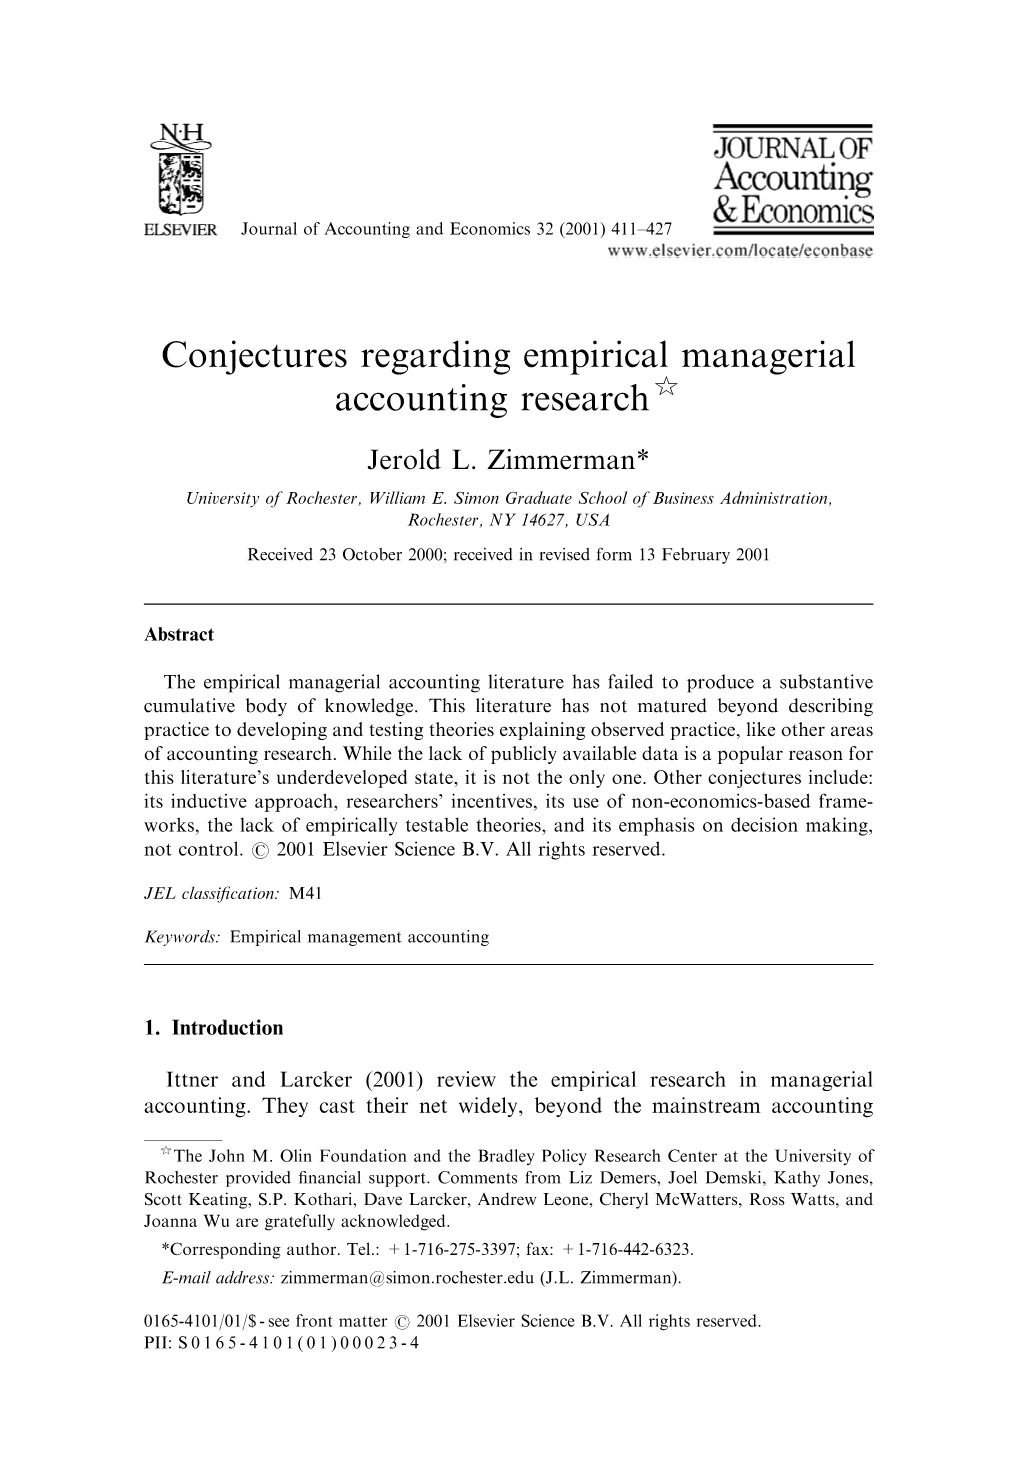 Conjectures Regarding Empirical Managerial Accounting Research$